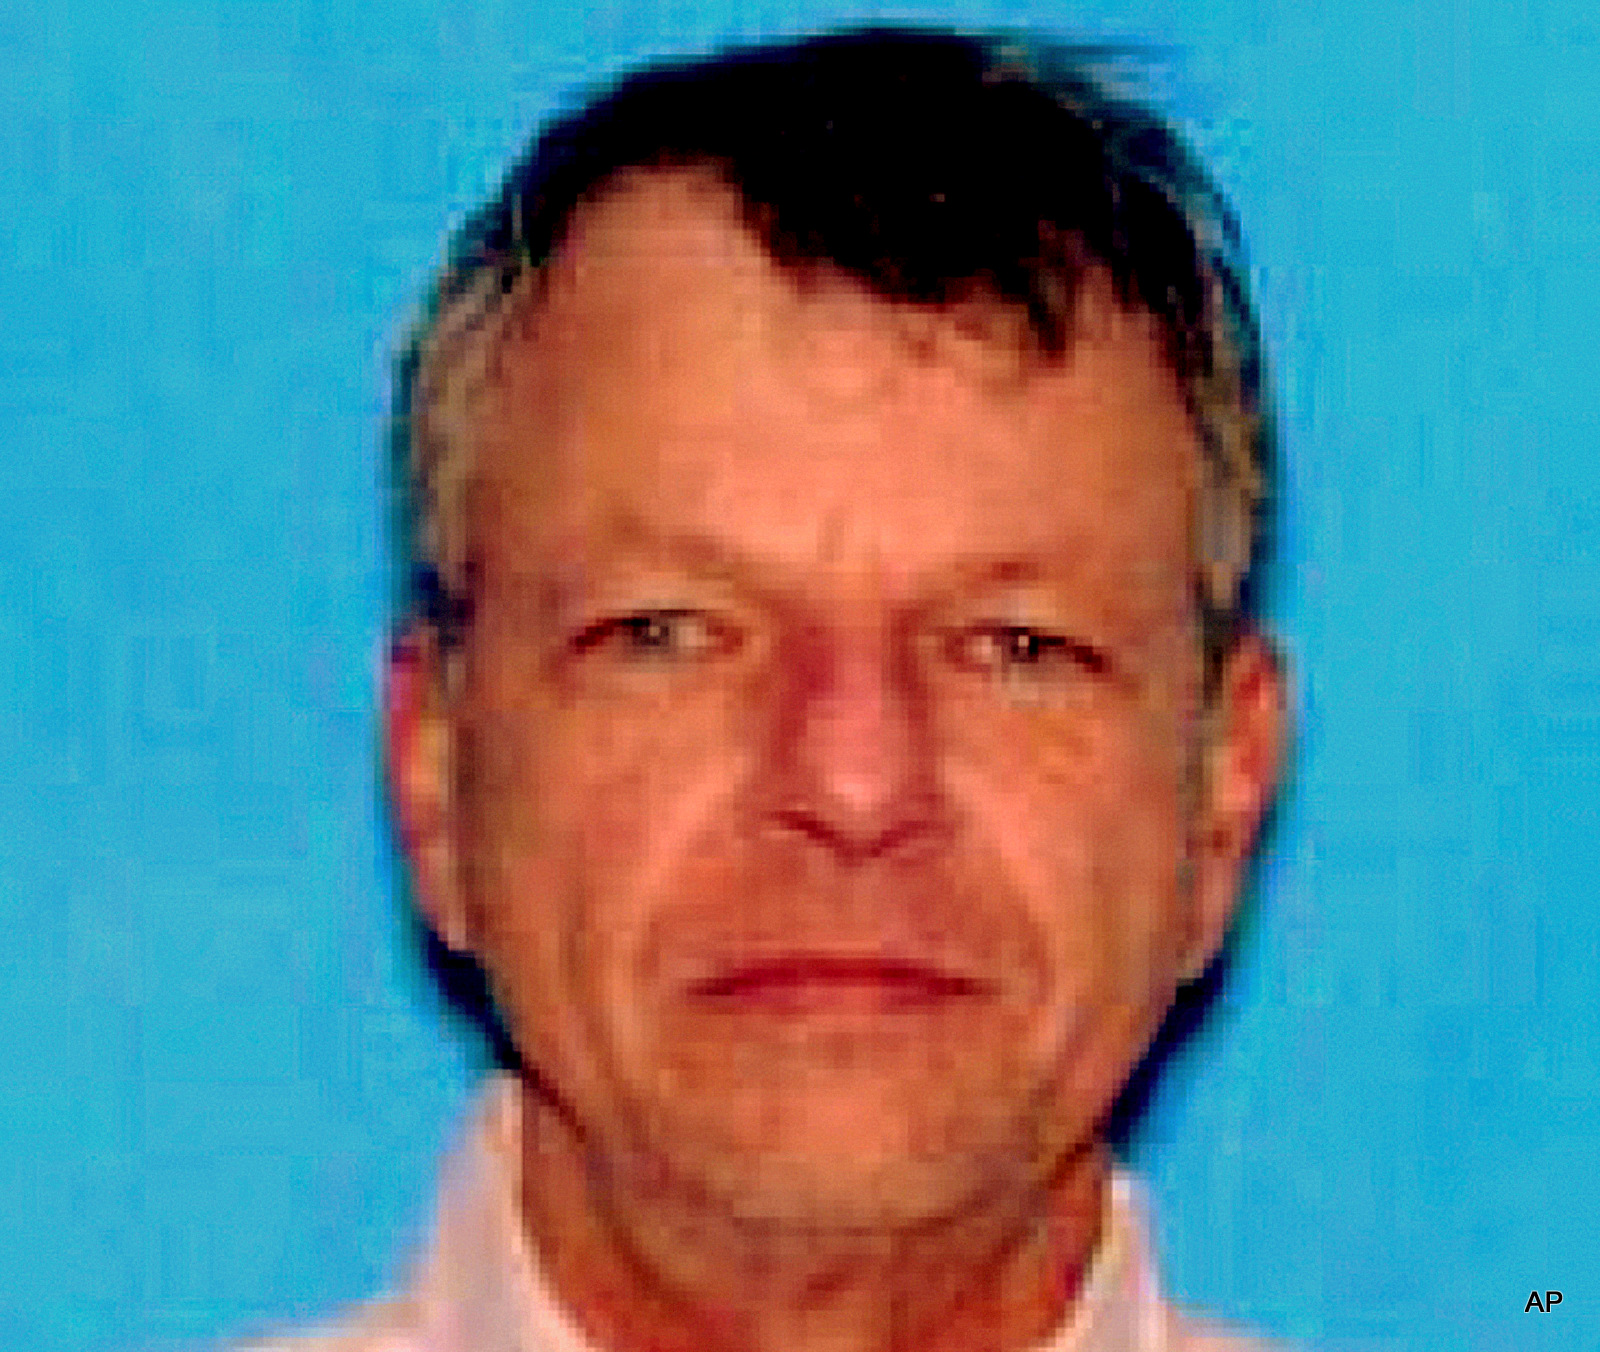 This undated photo provided by the Lafayette Police Department shows John Russel Houser, in Lafayette, La. Authorities have identified Houser as the gunman who opened fire in a movie theater on Thursday, July 23, 2015, in Lafayette. 